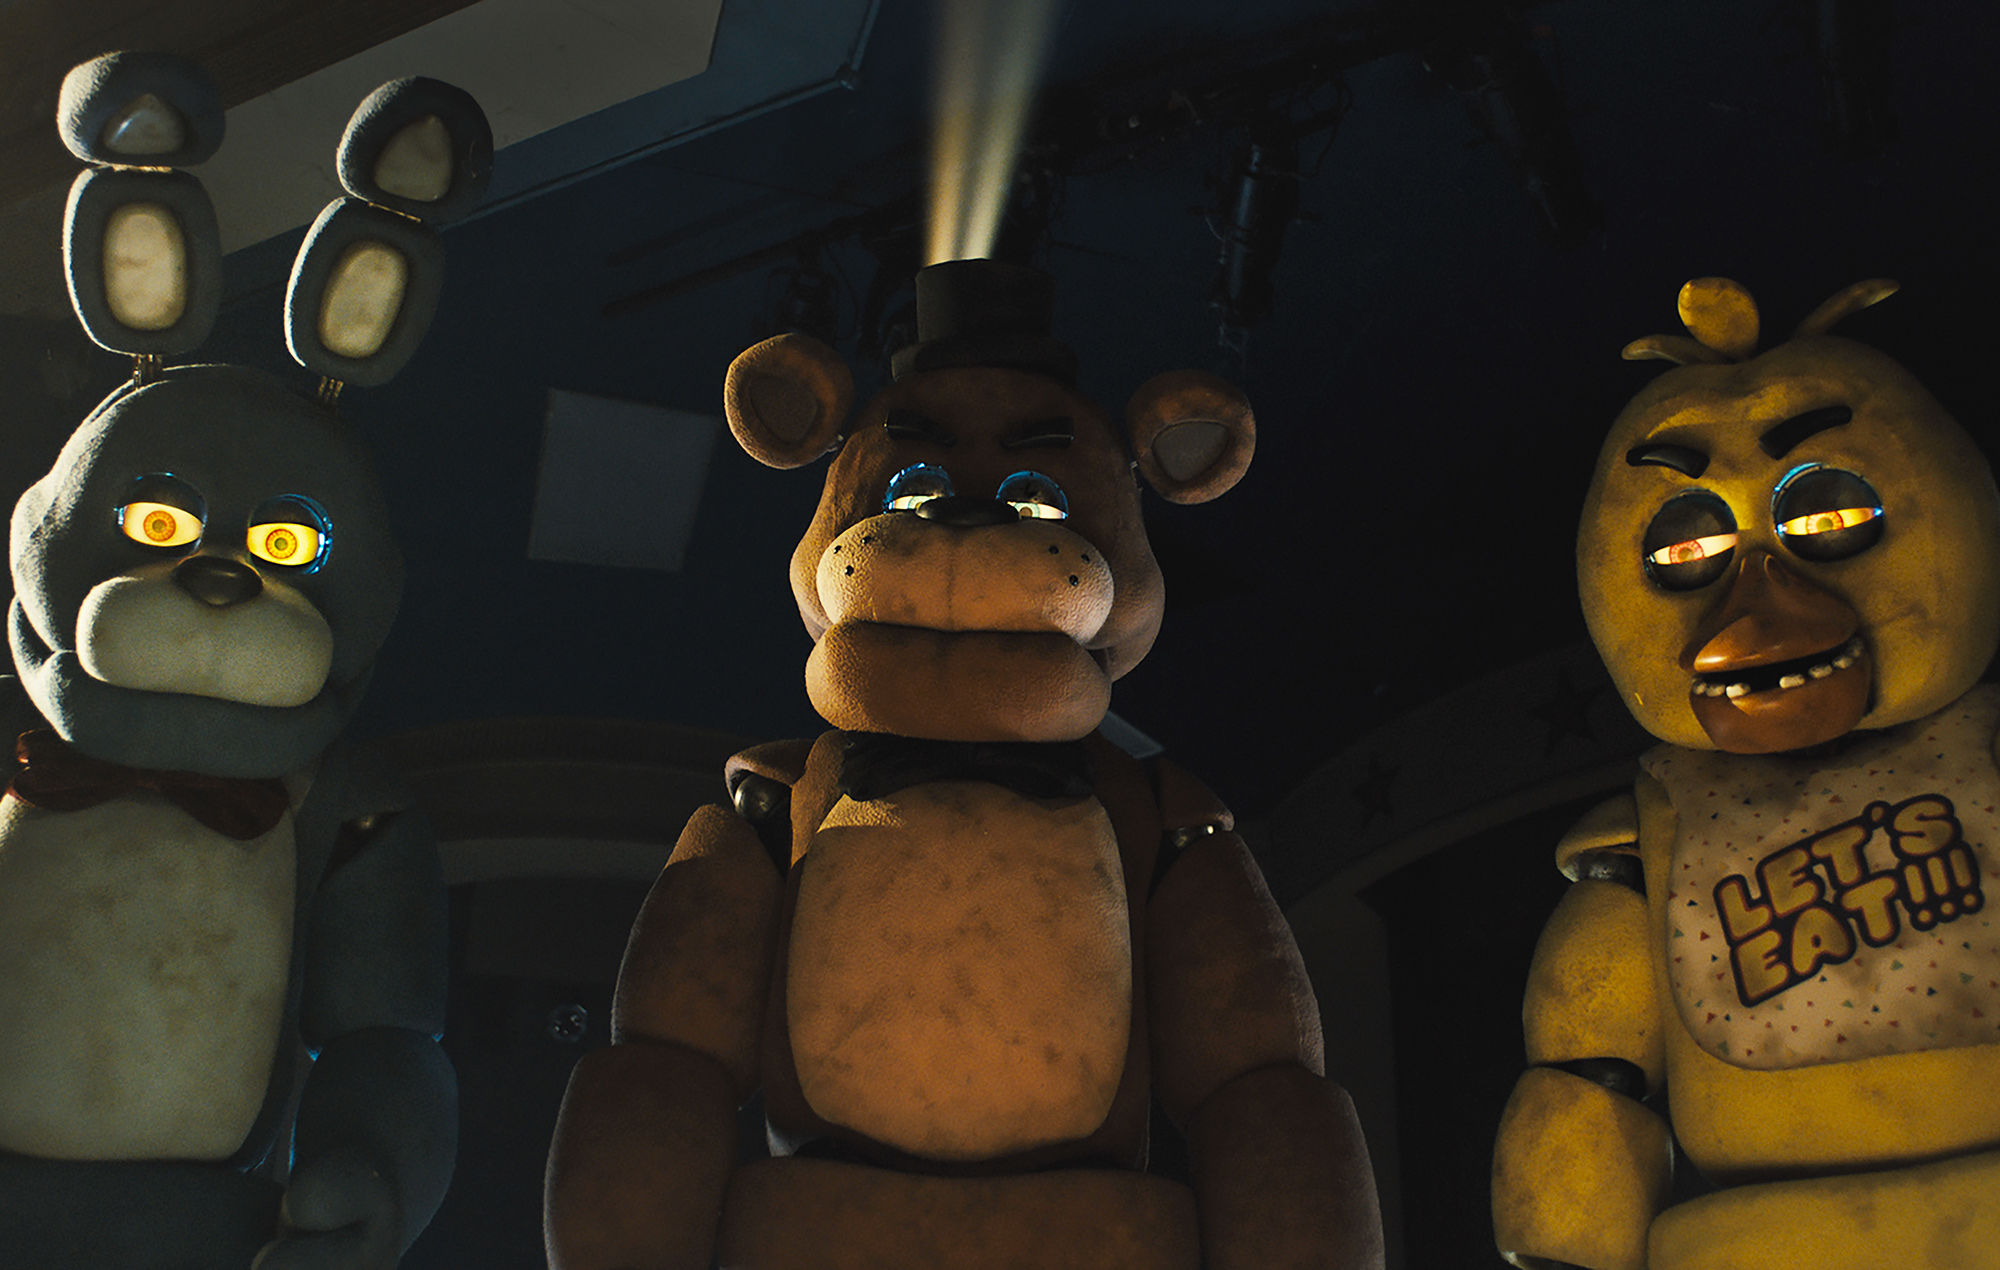 ‘Five Nights At Freddy’s’ review: pizza parlour horror doesn’t deliver